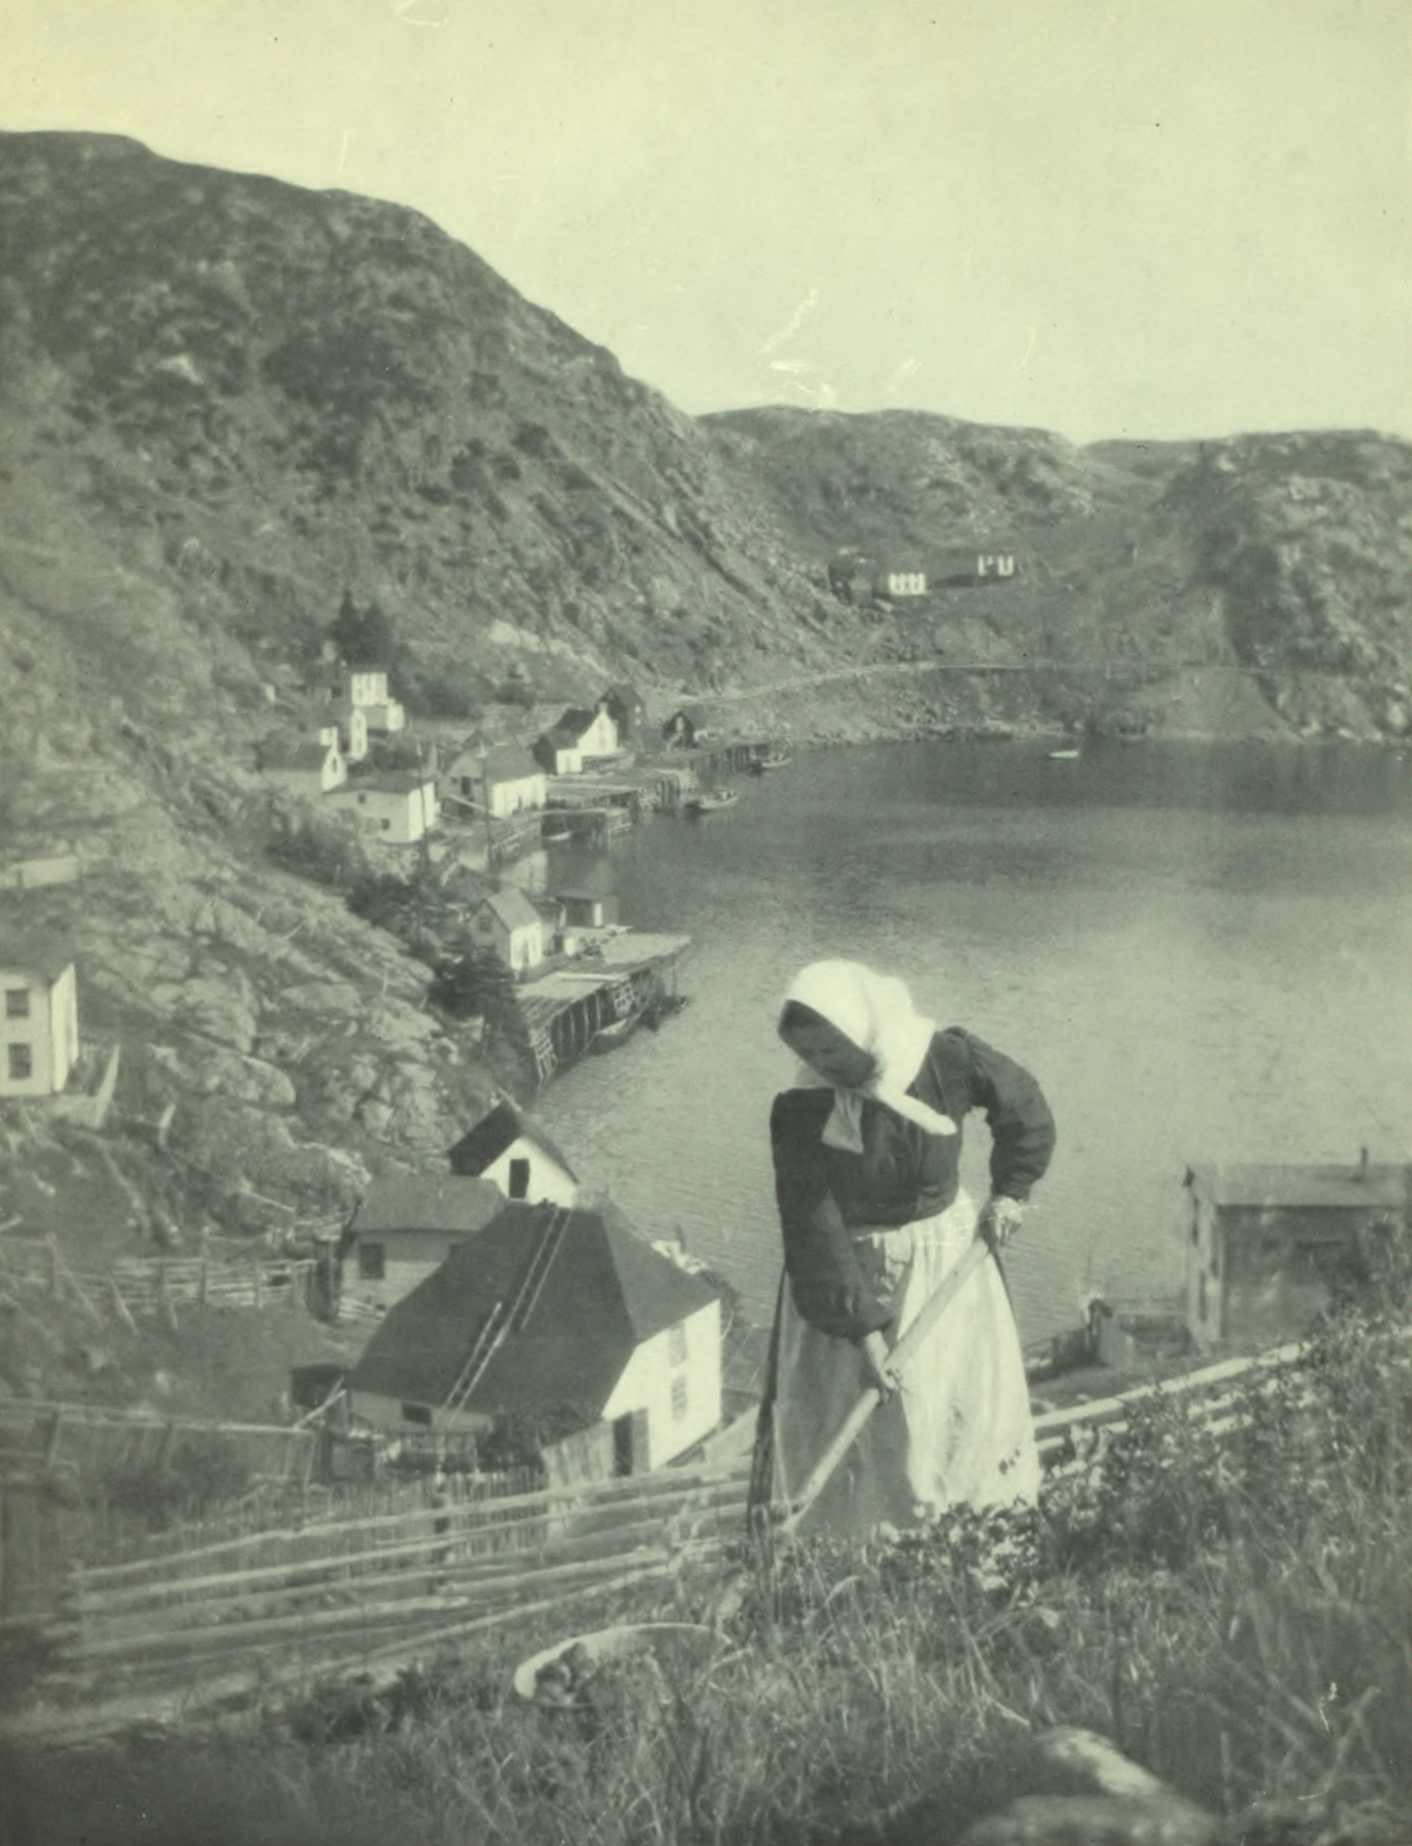 Woman gardening up in the hills. View of the inlet behind her.